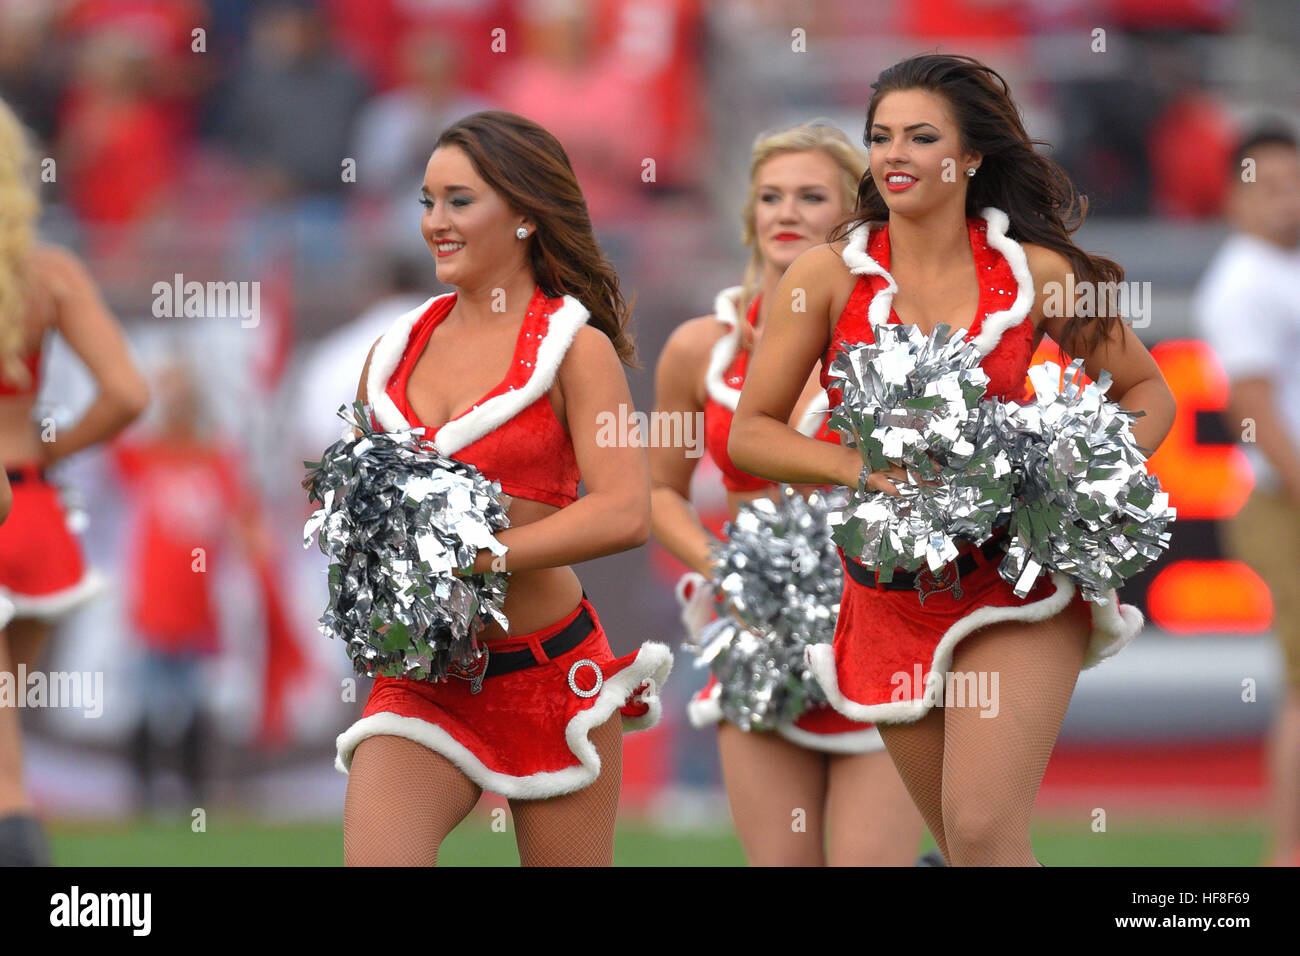 Tampa, Florida, USA. 11th Dec, 2016. Tampa Bay Buccaneers cheerleaders during their team's game against the New Orleans Saints at Raymond James Stadium in Tampa, Florida on Dec. 11, 2016.ZUMAPress/Scott A. Miller © Scott A. Miller/ZUMA Wire/Alamy Live News Stock Photo